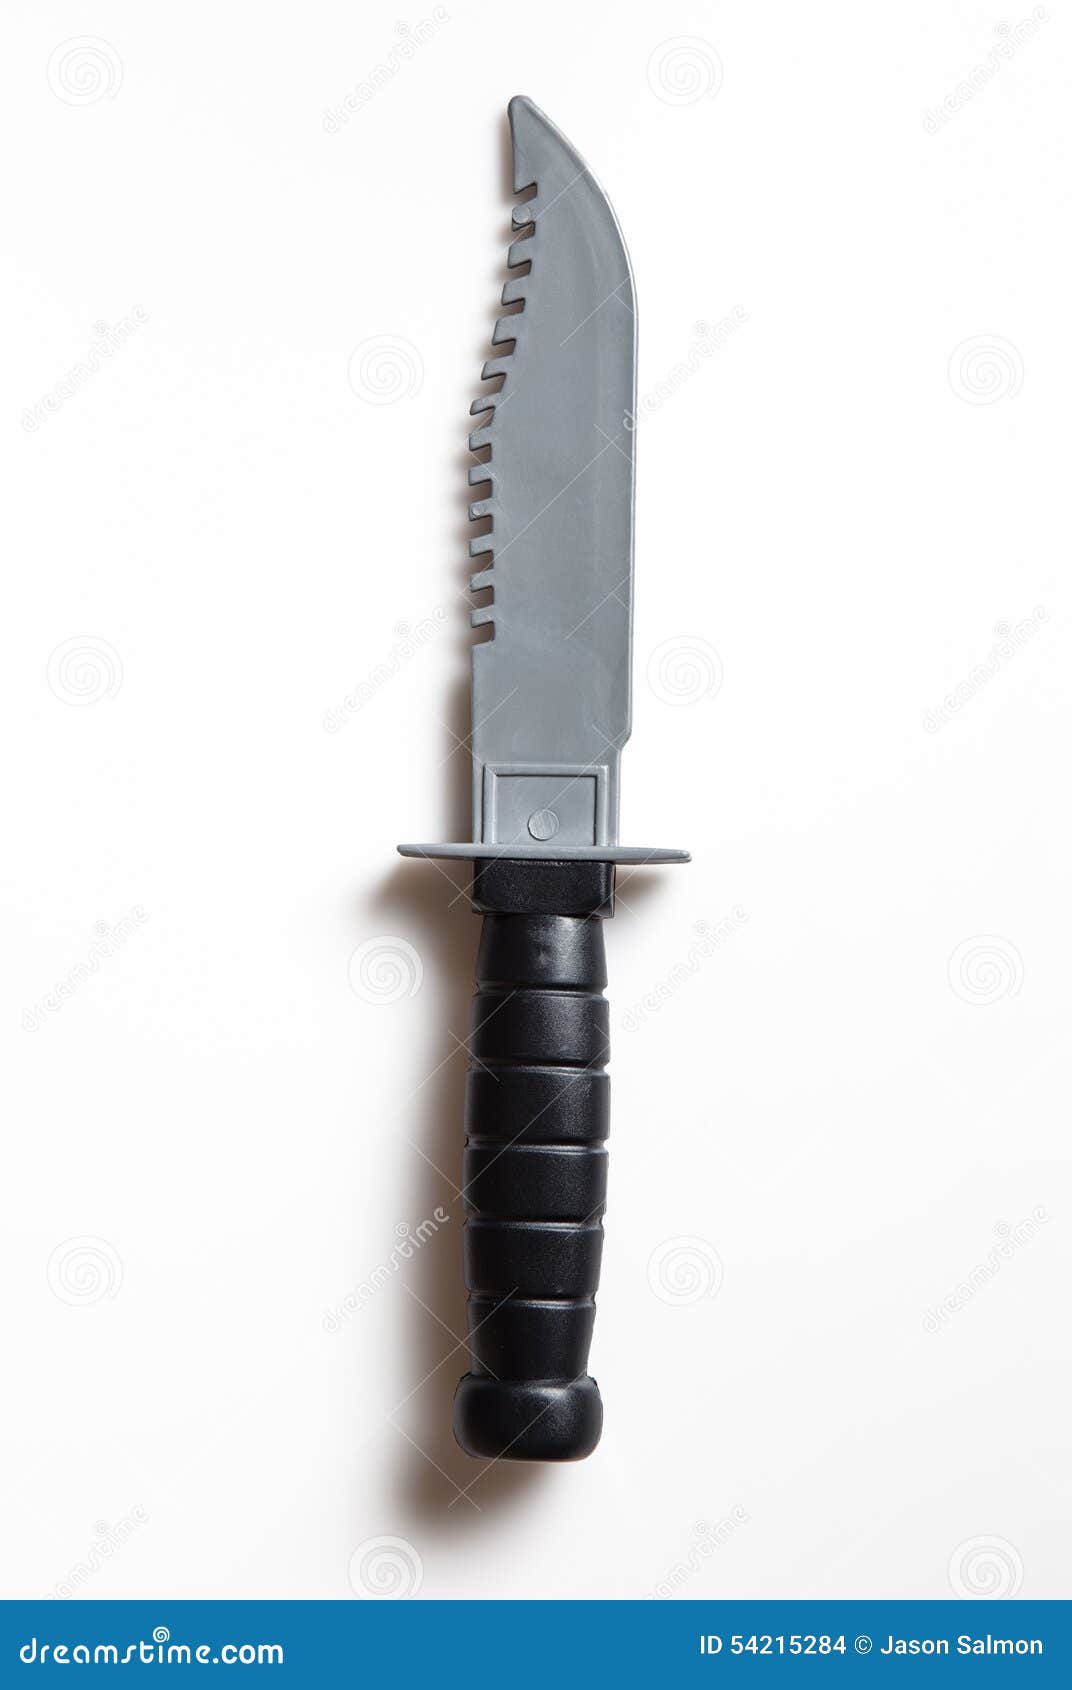 Toy knife stock photo. Image of plastic, costume, object